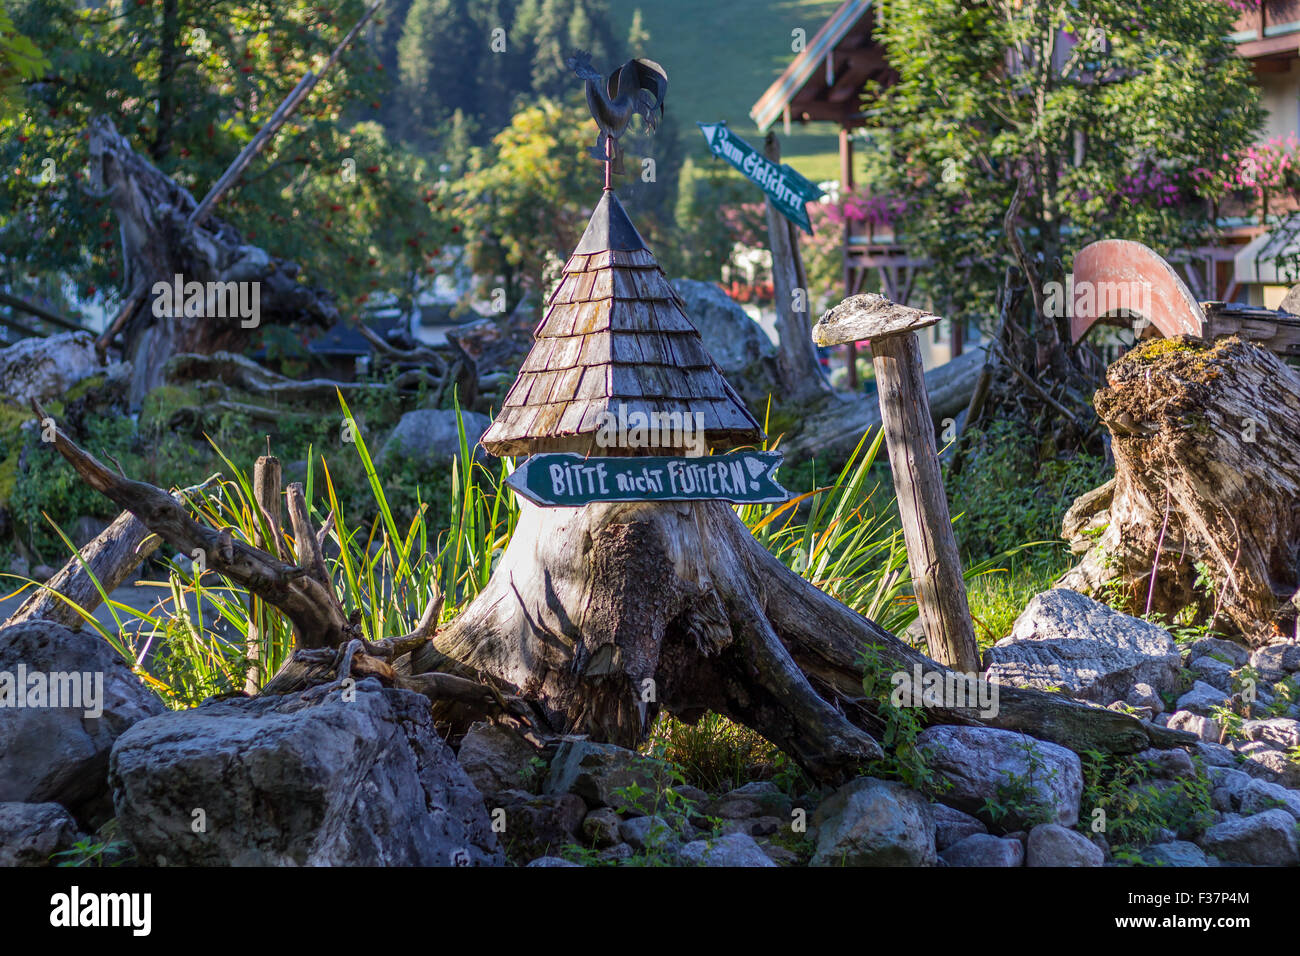 Village with beautiful houses, flowers, small details, animals in springtime, Austria, Filzmoos Stock Photo